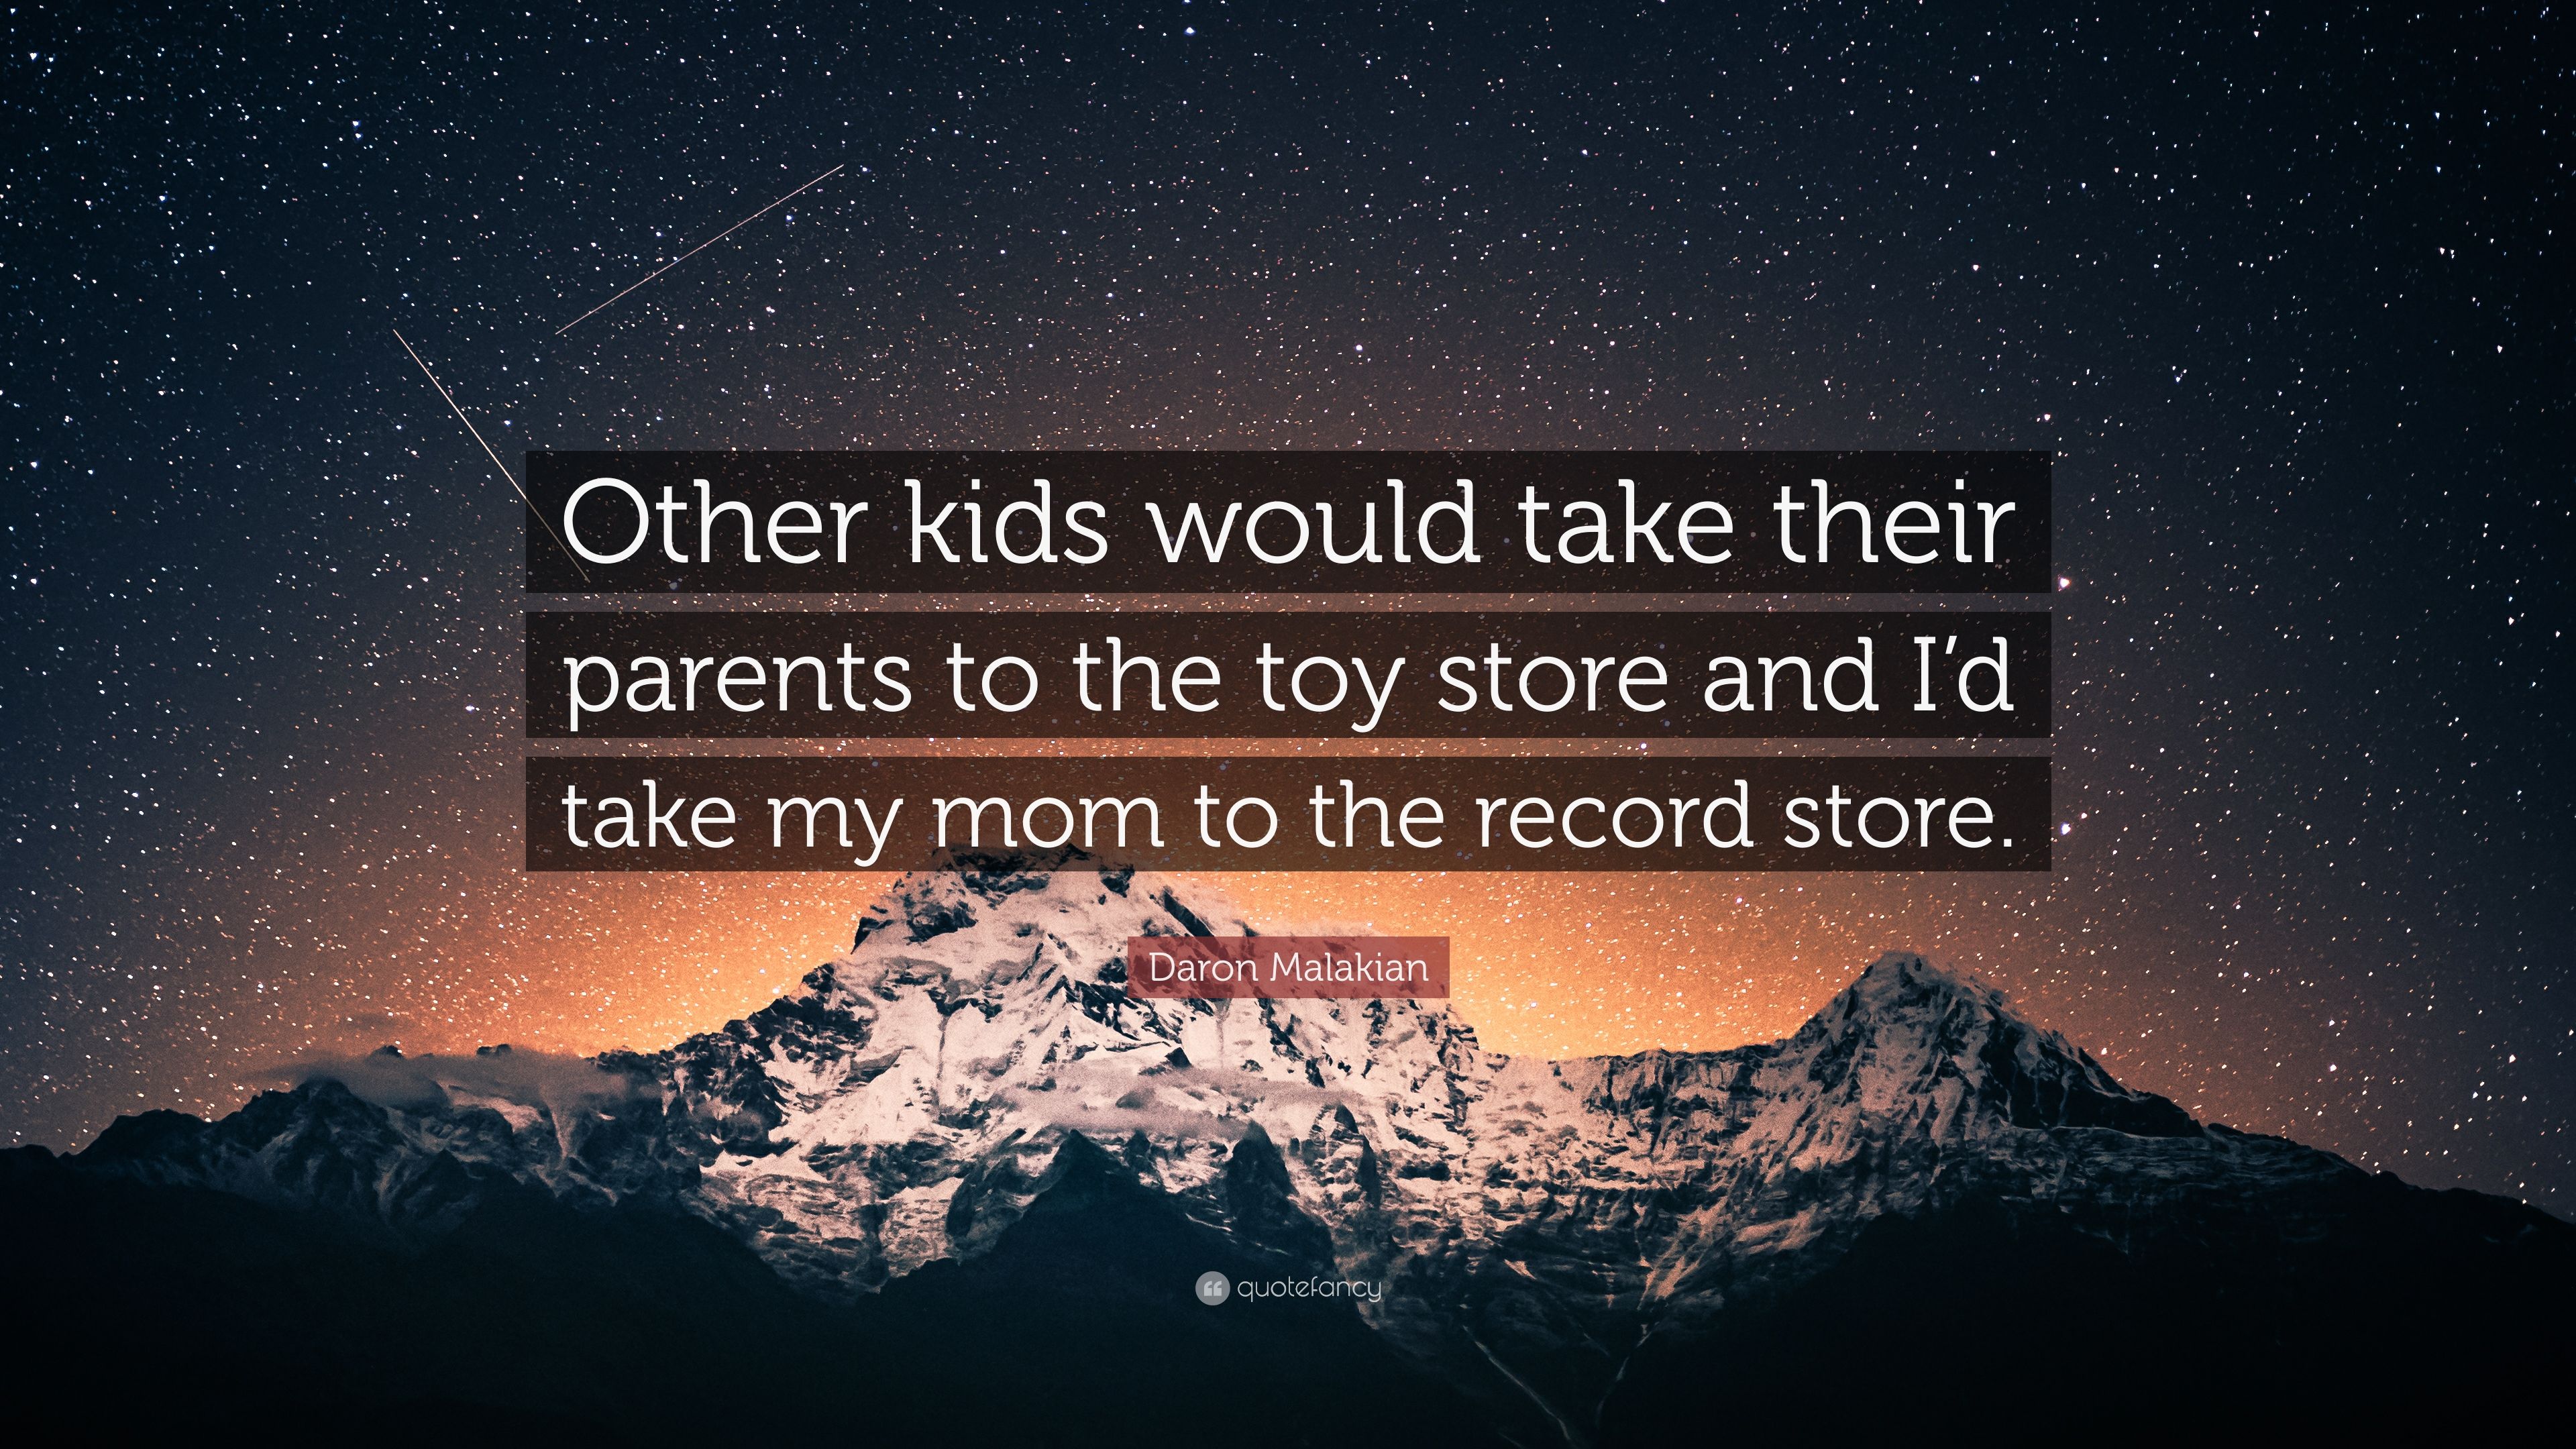 Daron Malakian Quote: “Other kids would take their parents to